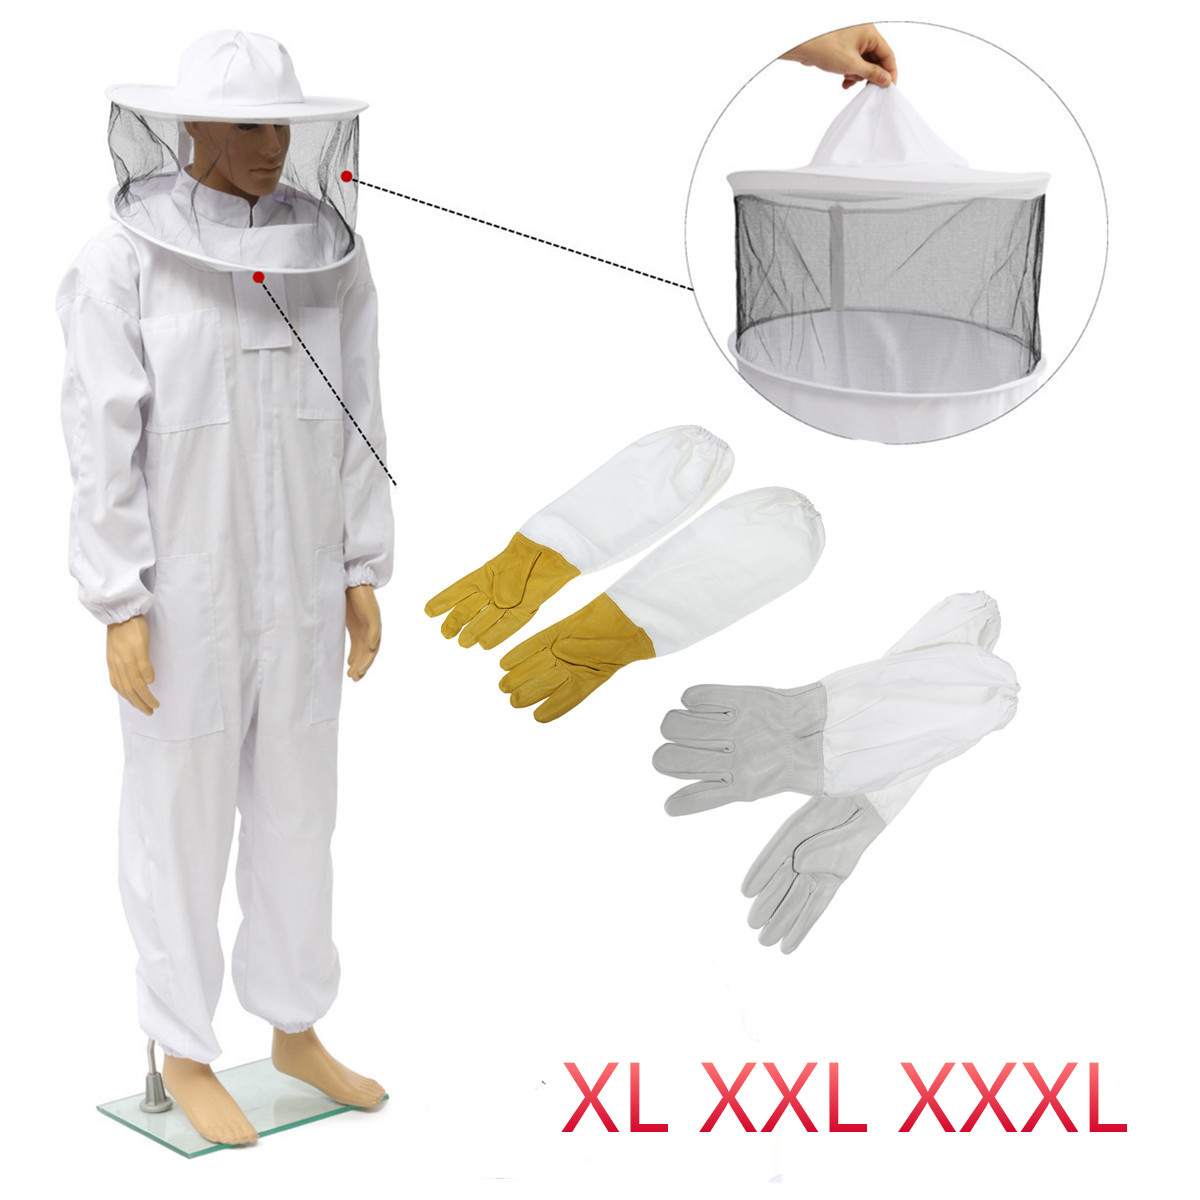 Beekeepers Bee Keeping Cotton Full Protector Suit With Veil Hat Hood Bee Suit XL XXL XXL 12